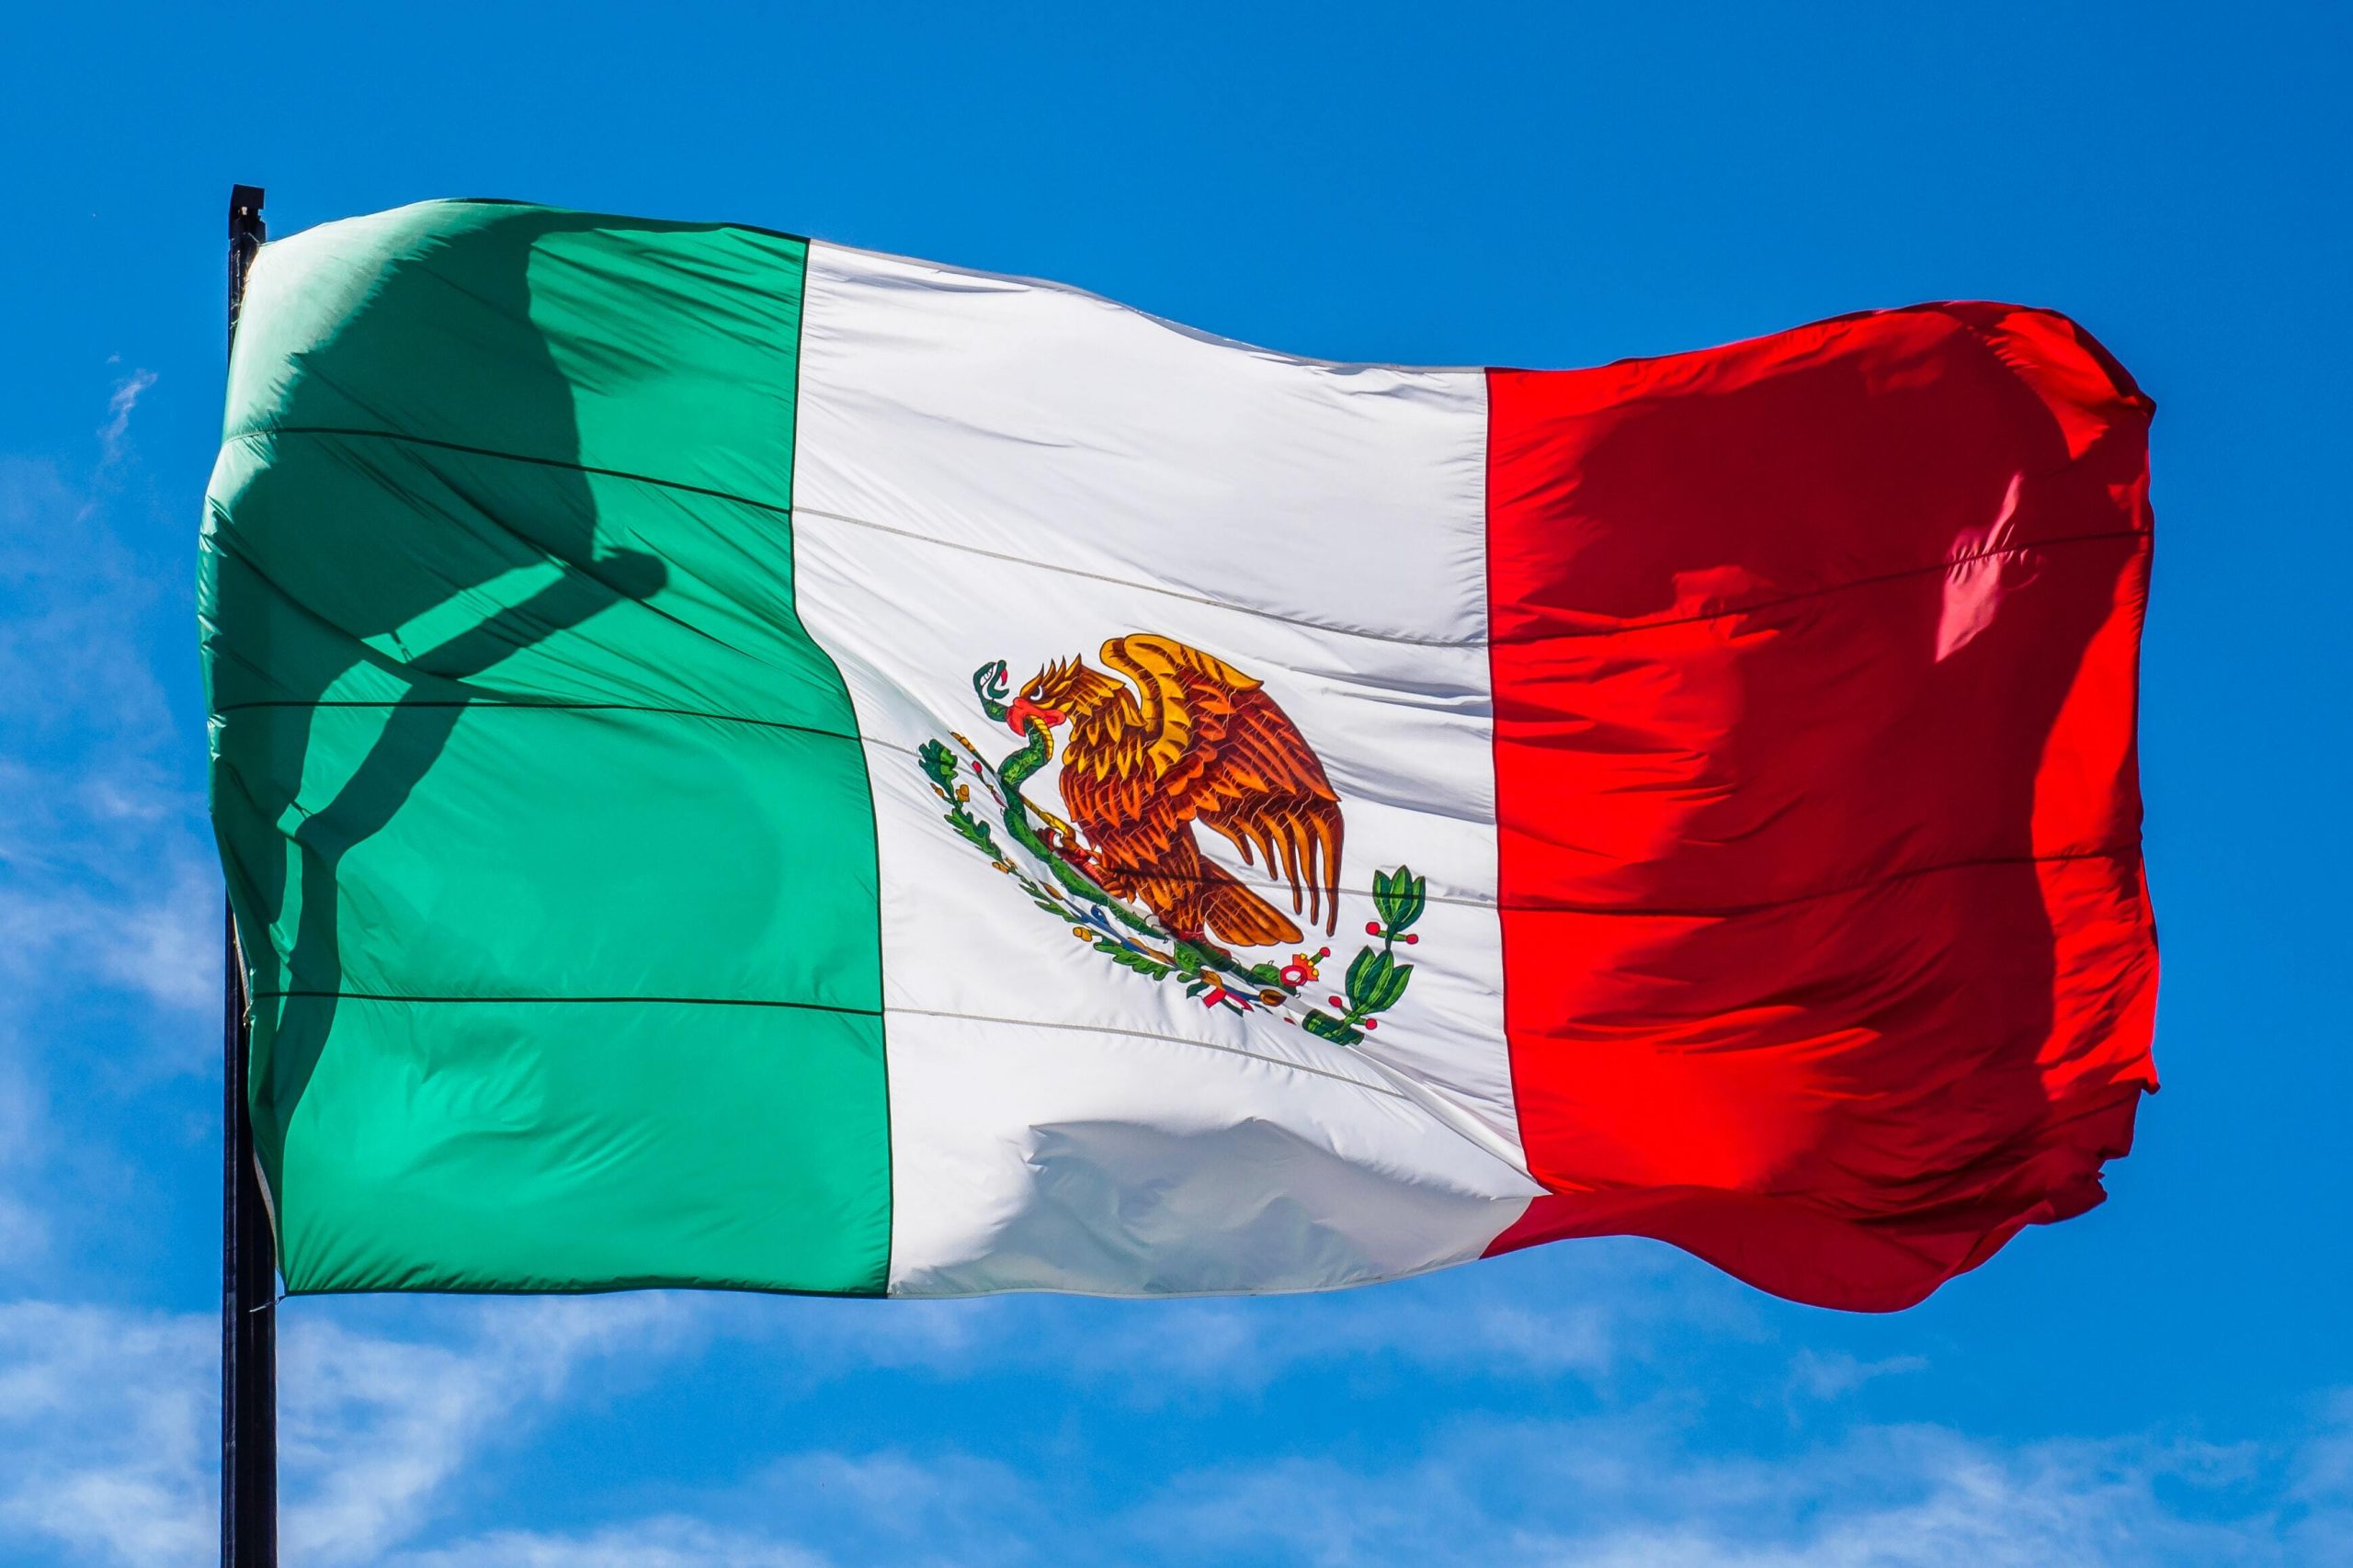 How to send money to Mexico: The fastest international transfer